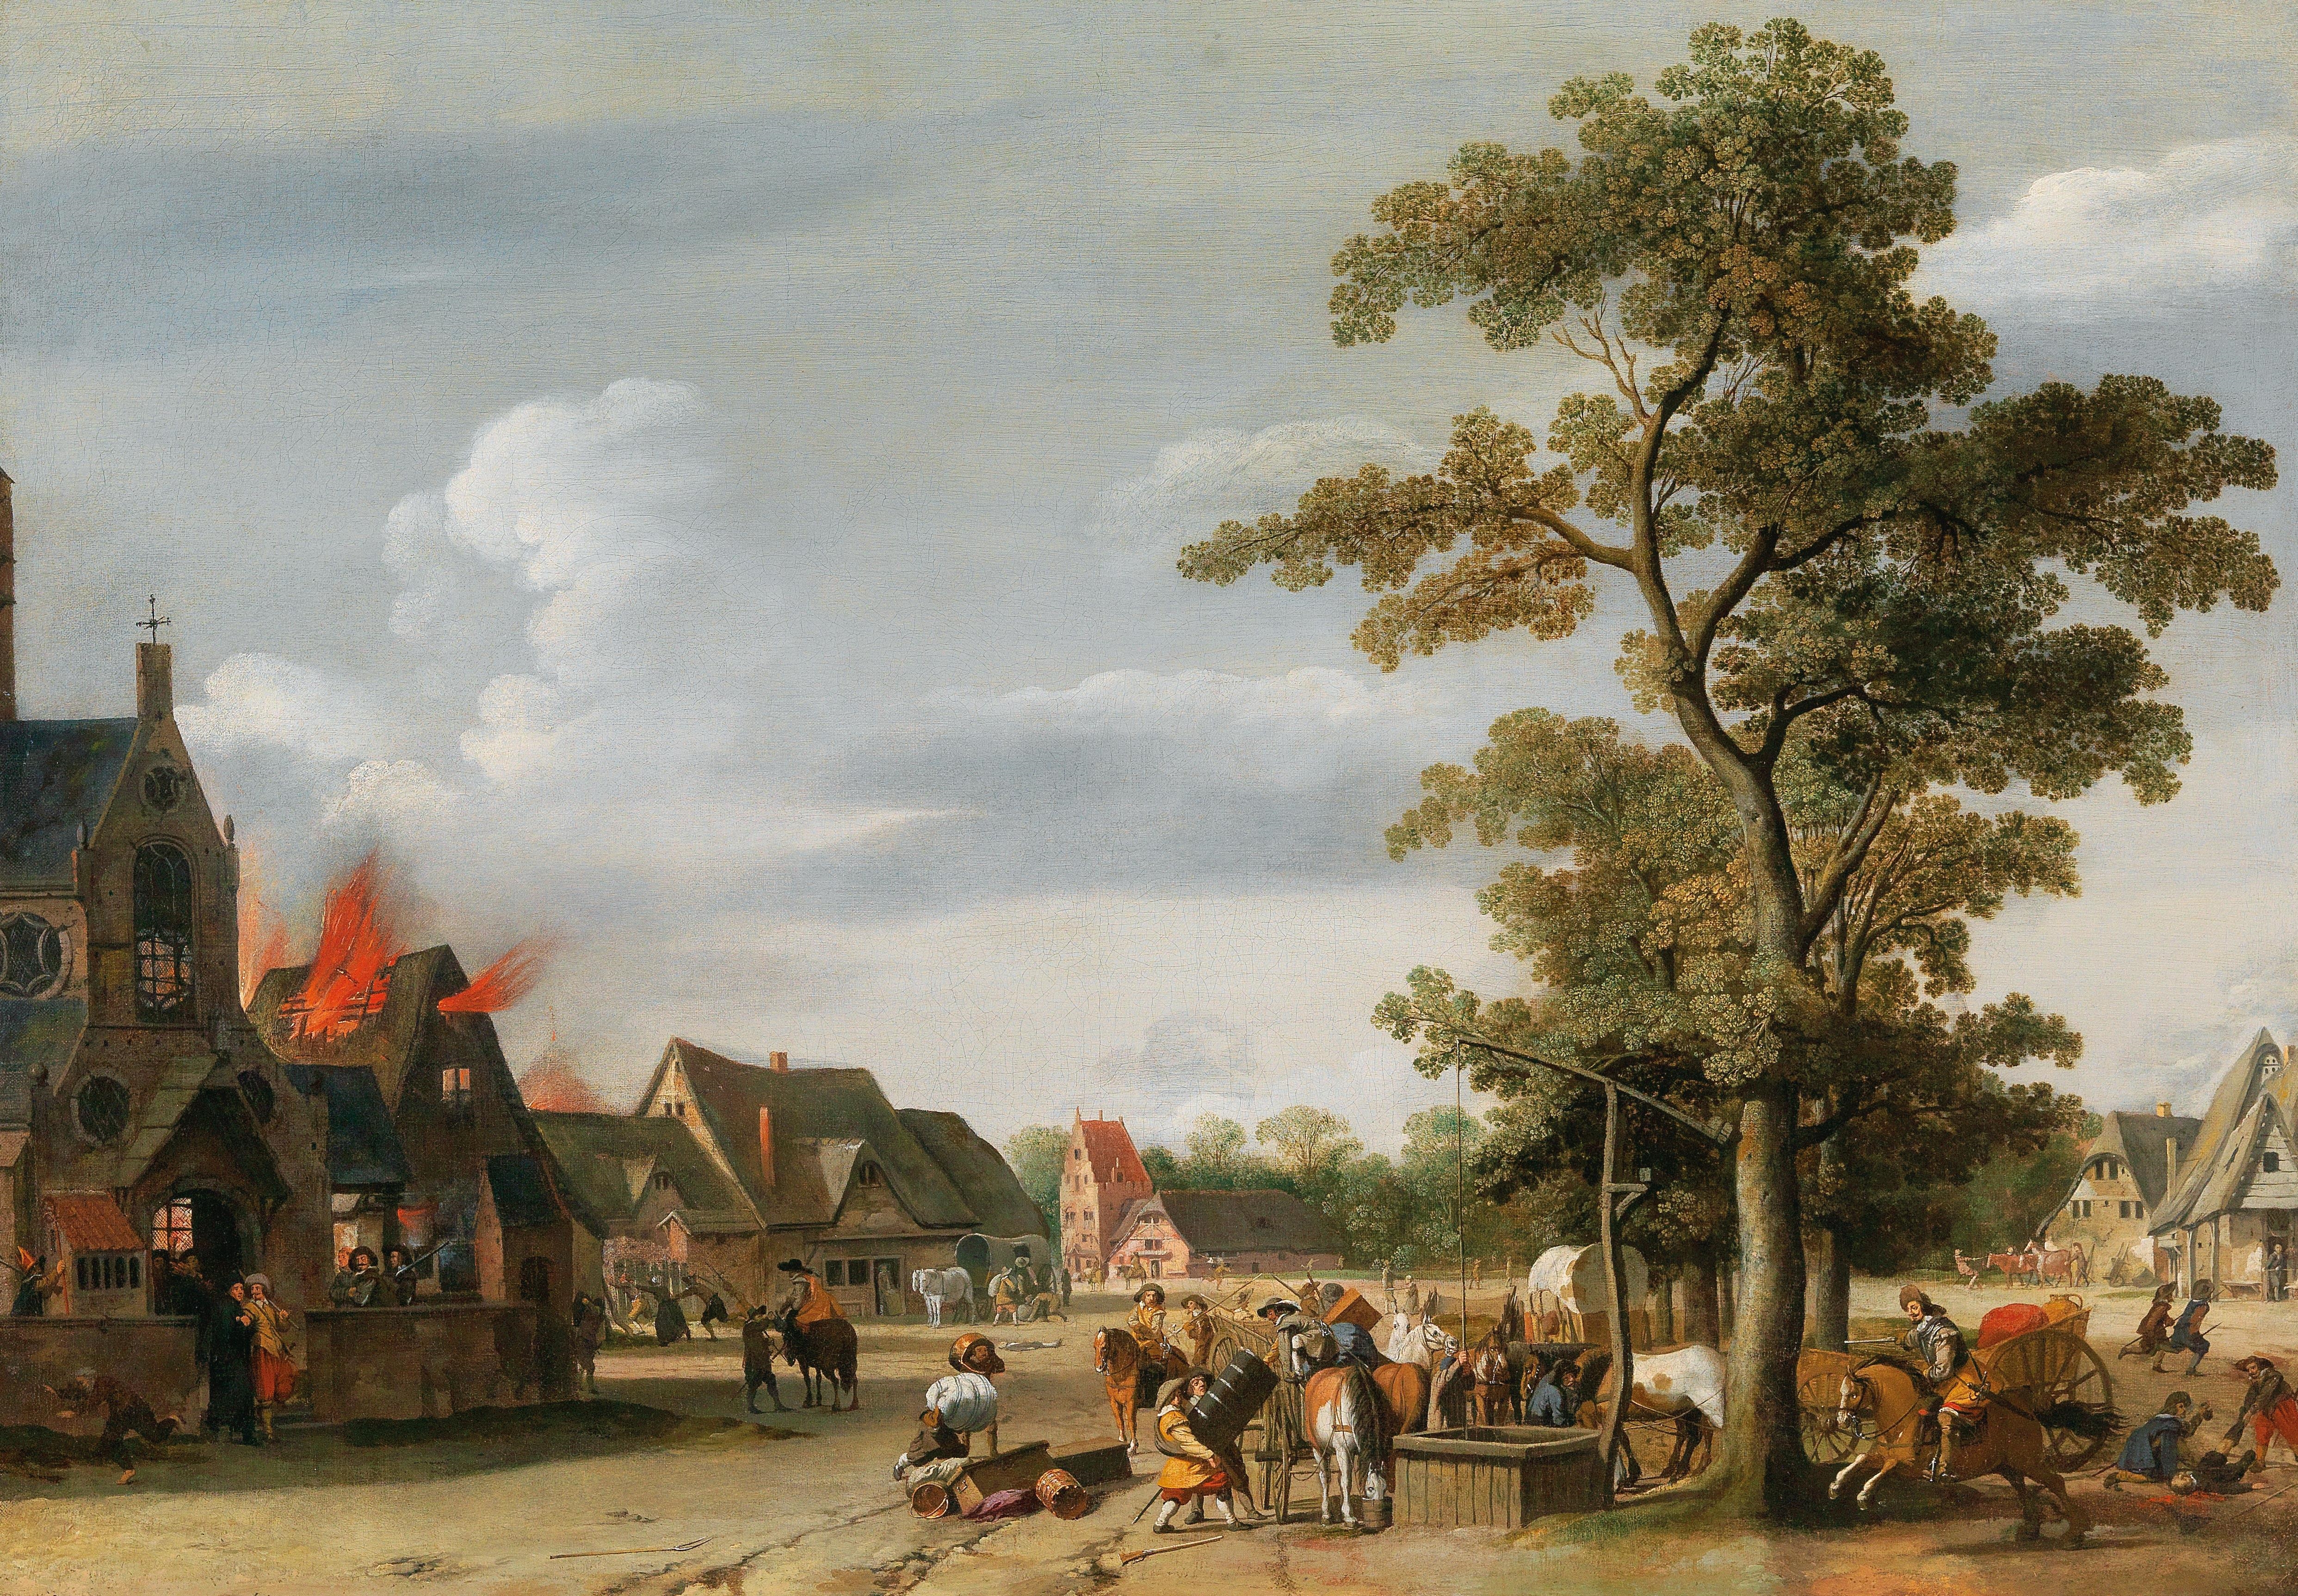 Artwork by Pieter Jansz. Post, Soldiers plundering a village, Made of oil on canvas